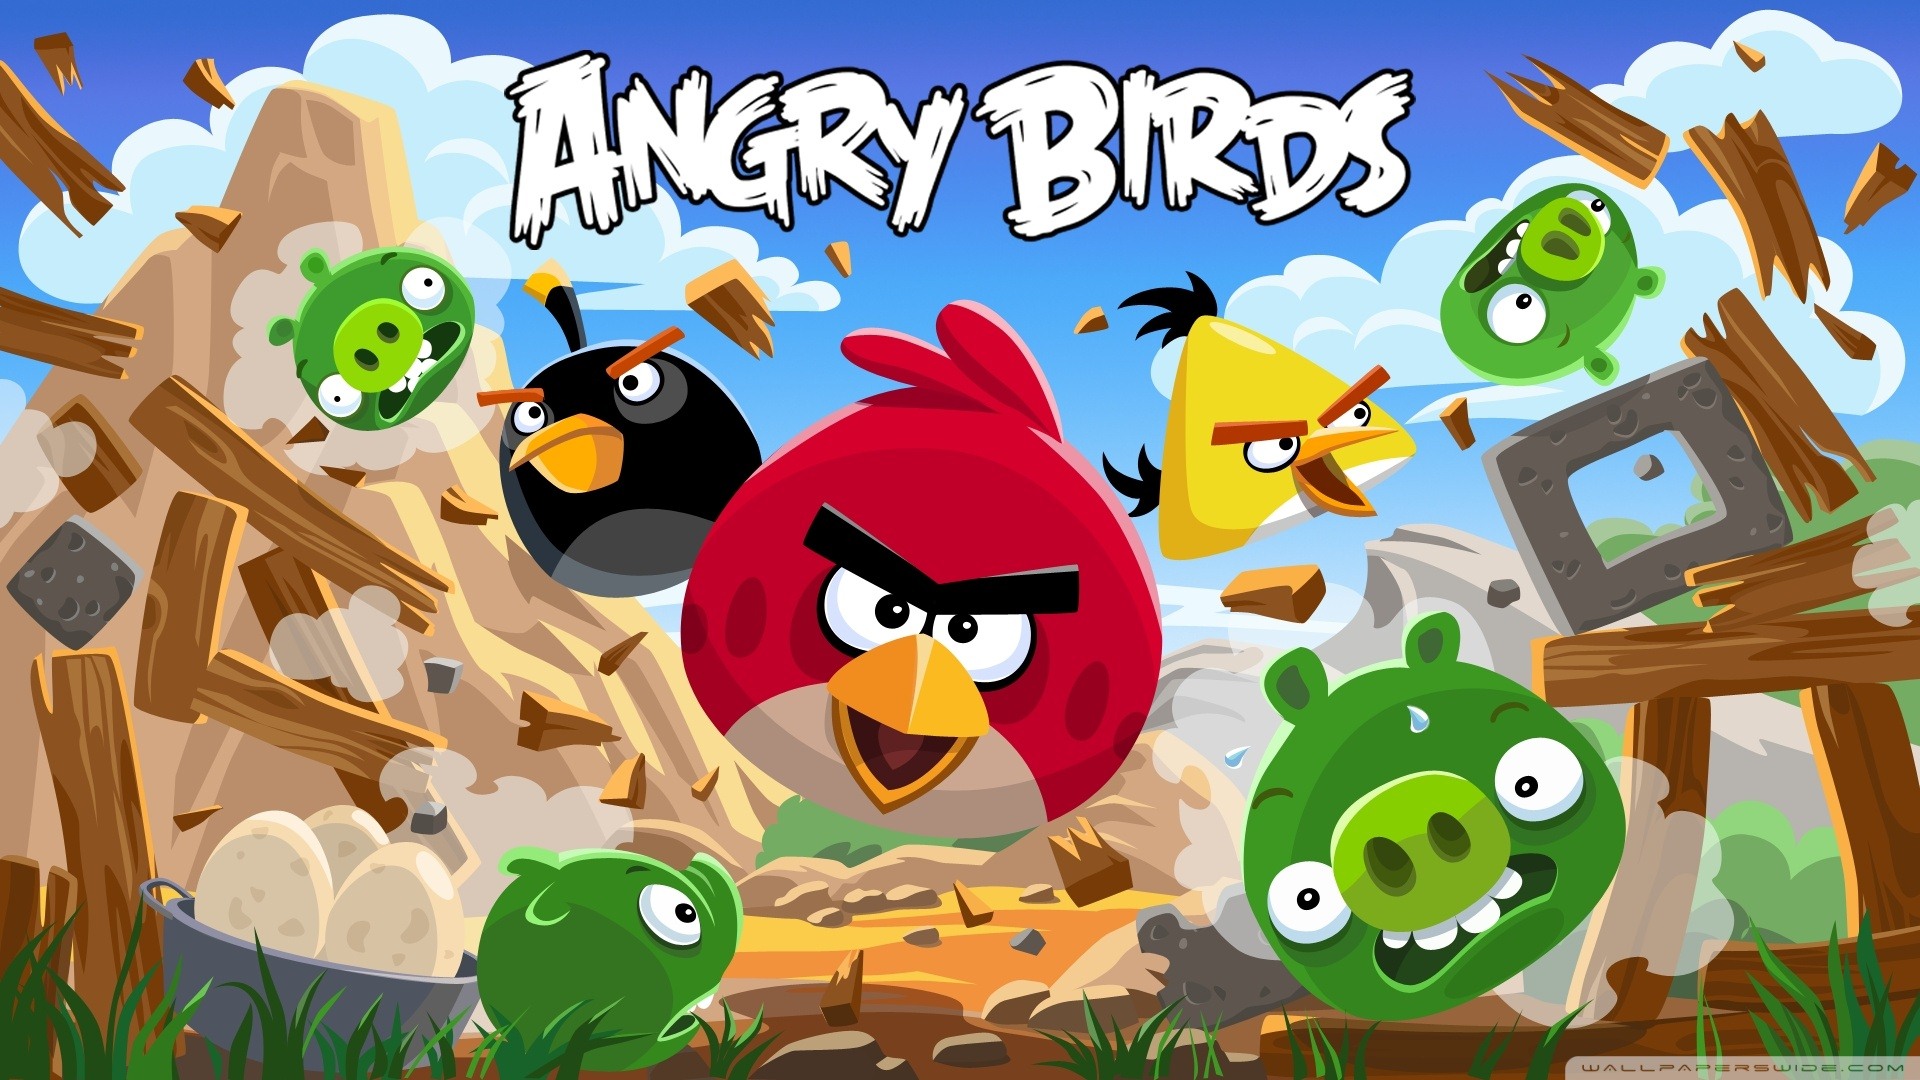 Angry Birds Spiel wallpapers #10 - 1920x1080